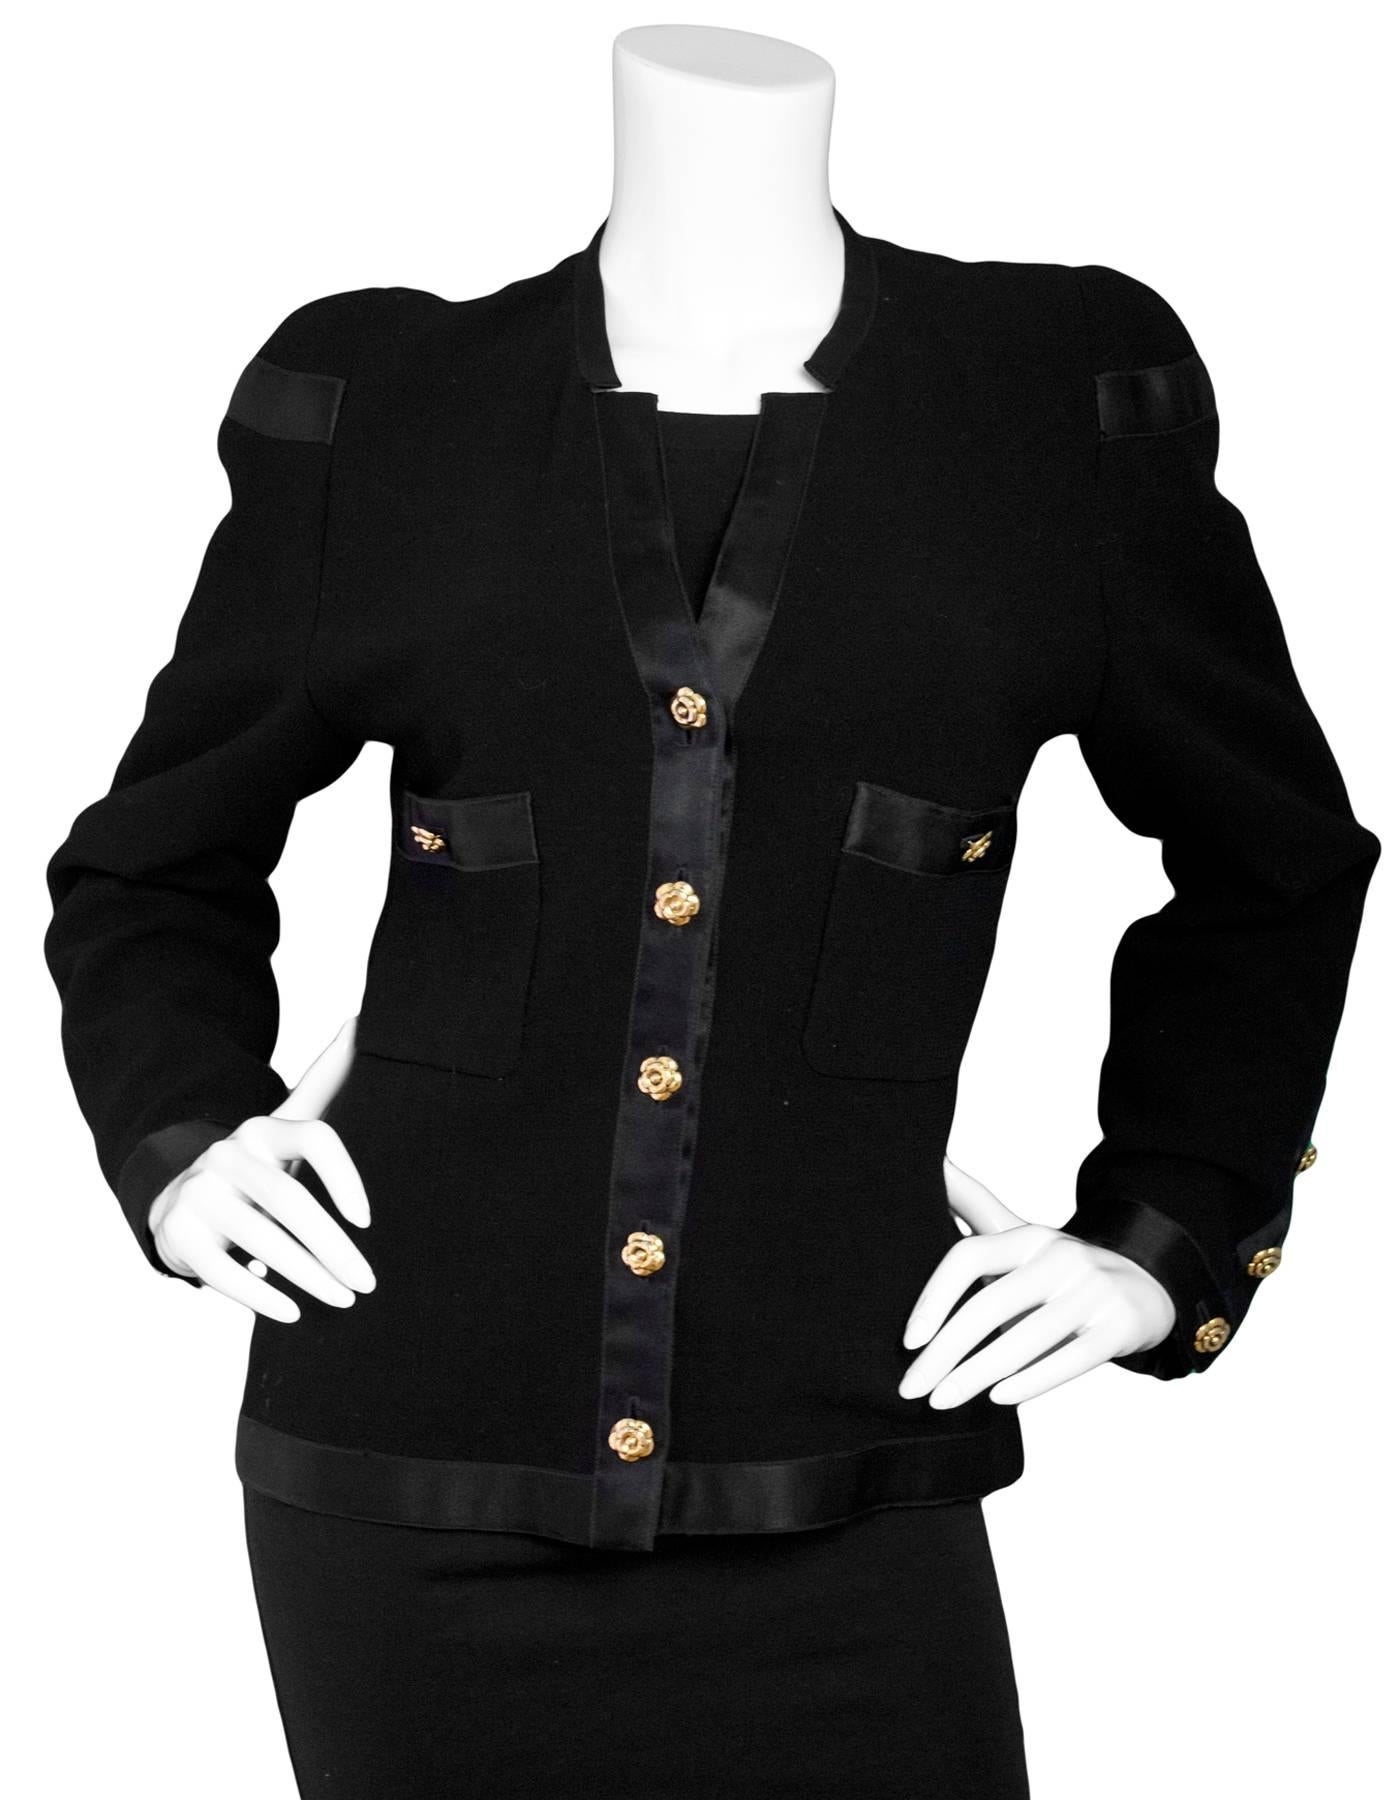 Chanel Vintage Black Boucle Jacket
Features camelia buttons and satin trim throughout

Made In: France
Color: Black
Composition: 100% Wool
Lining: Black, 100% silk
Closure/Opening: Button down front
Exterior Pockets: Two breast patch